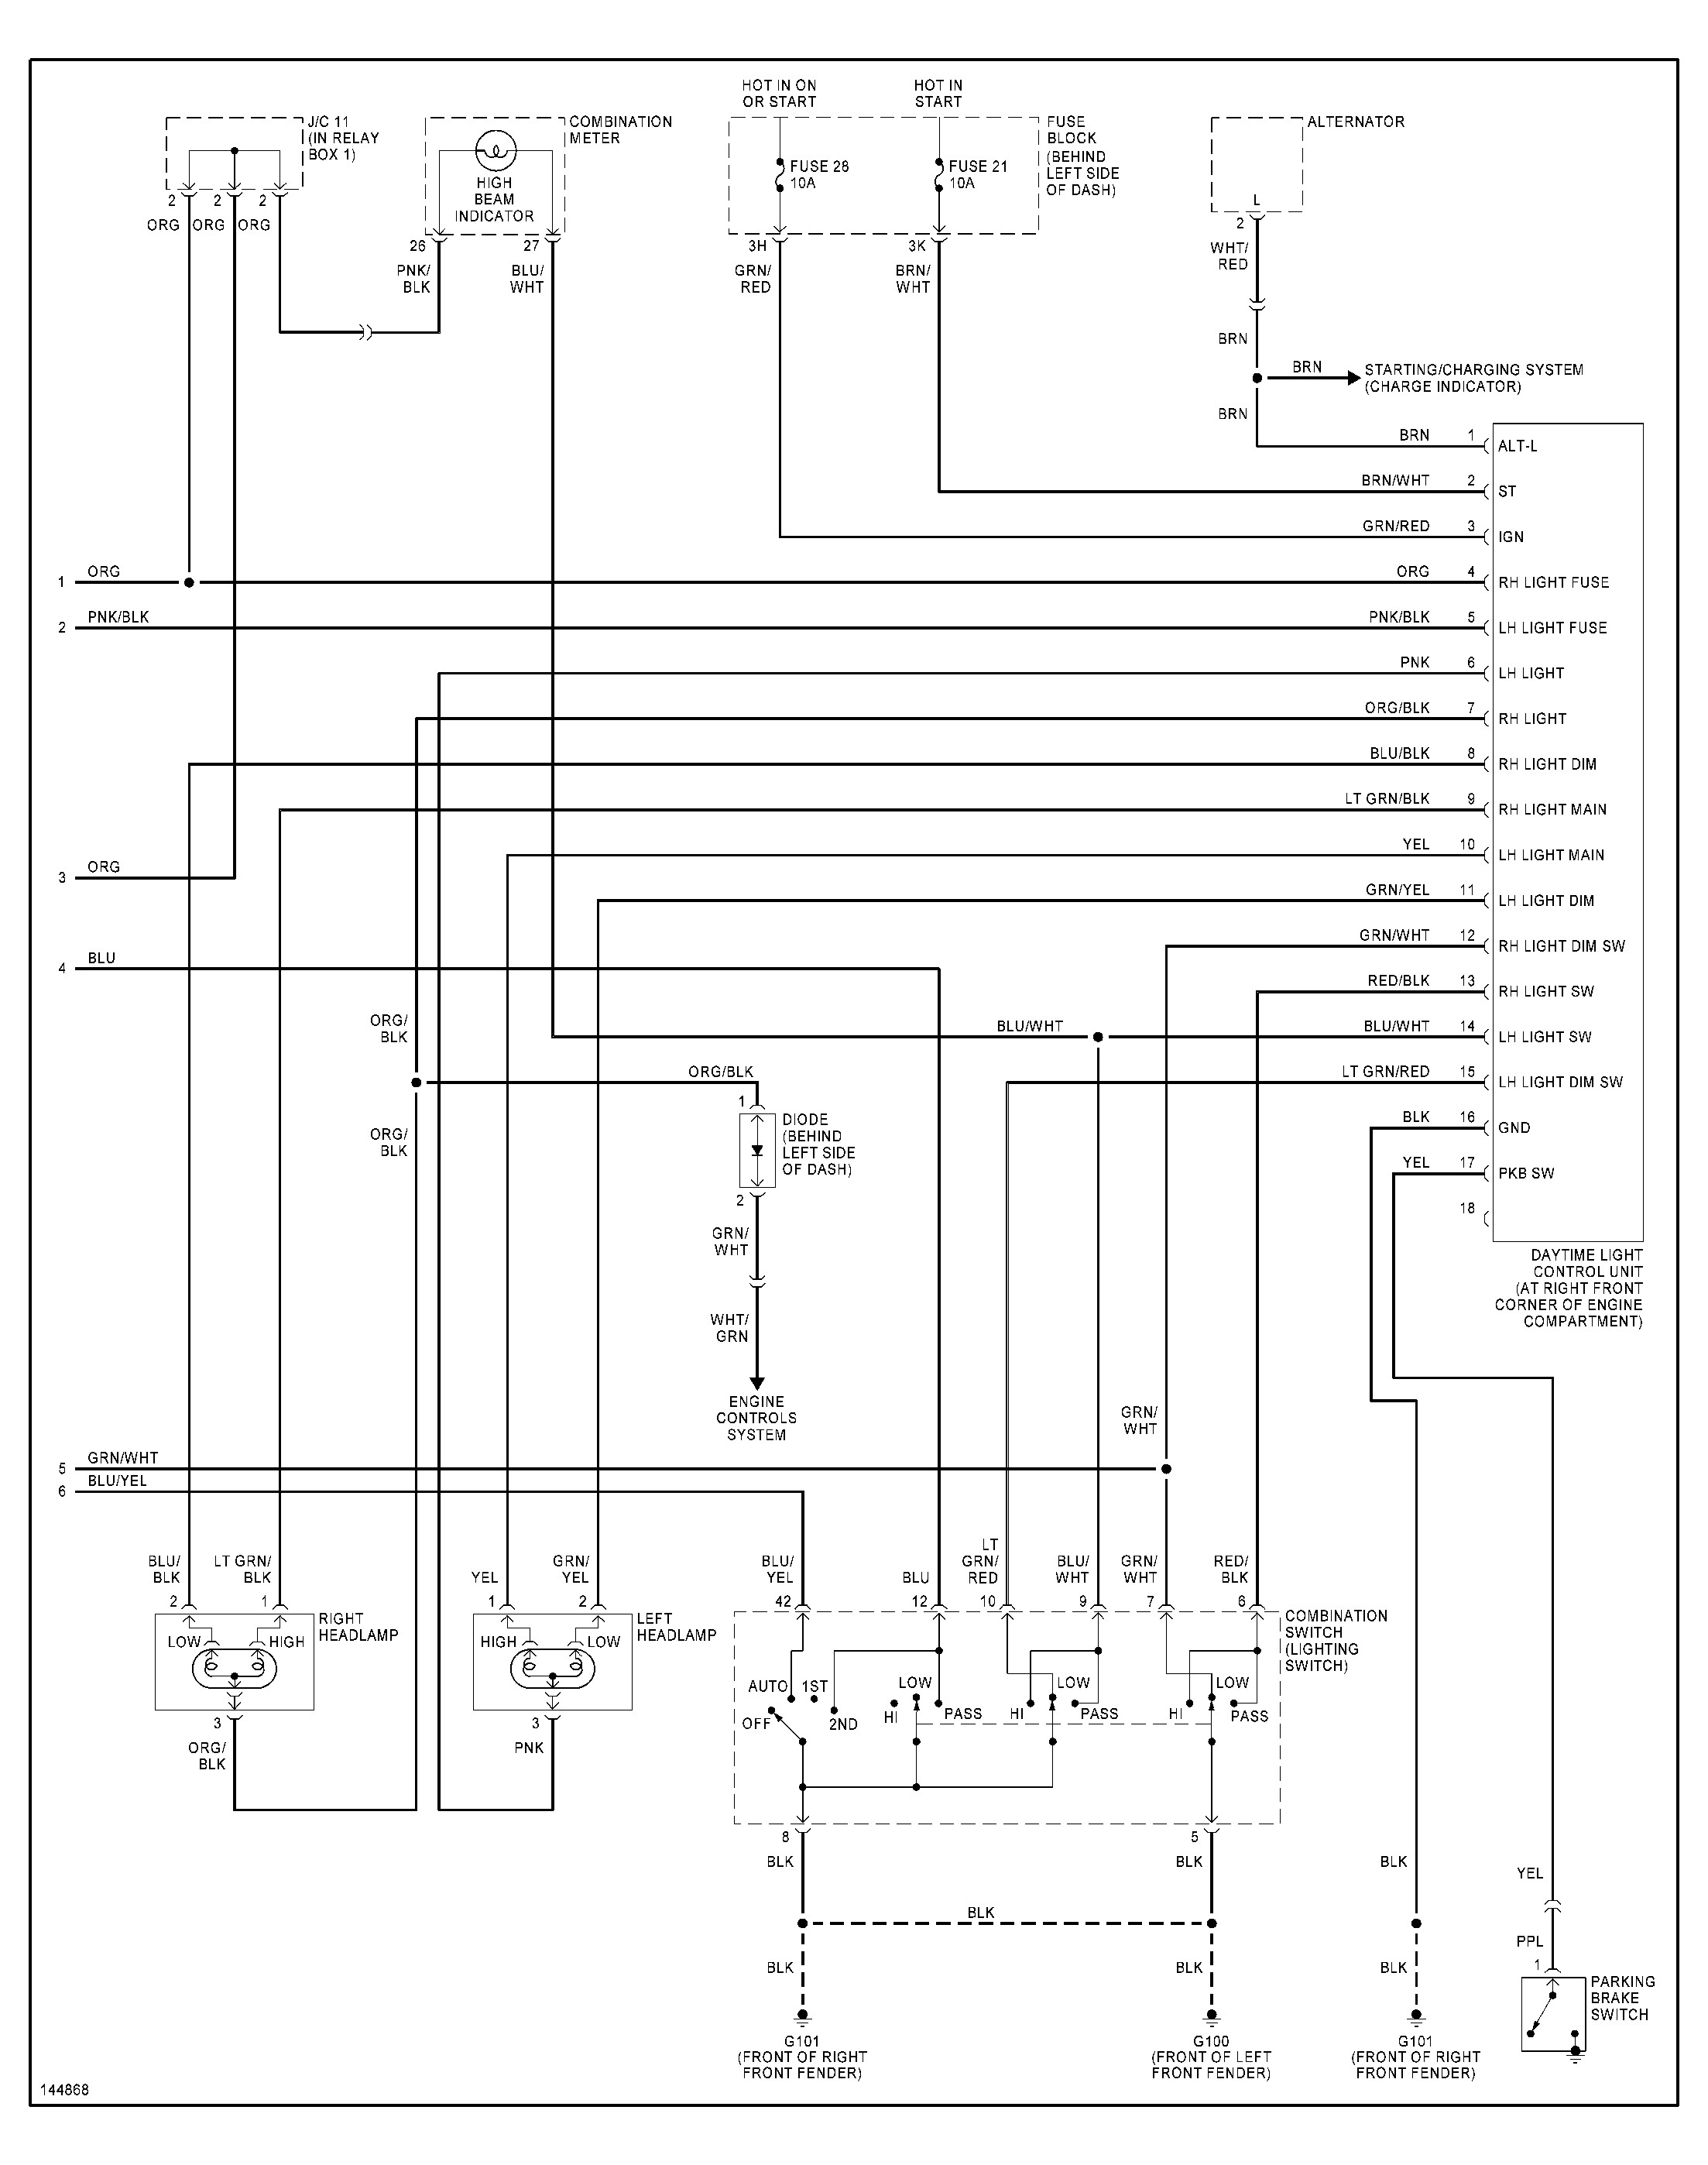 1998 Nissan Maxima Engine Diagram Nissan Maxima Radio Diagram Another Blog About Wiring Diagram • Of 1998 Nissan Maxima Engine Diagram